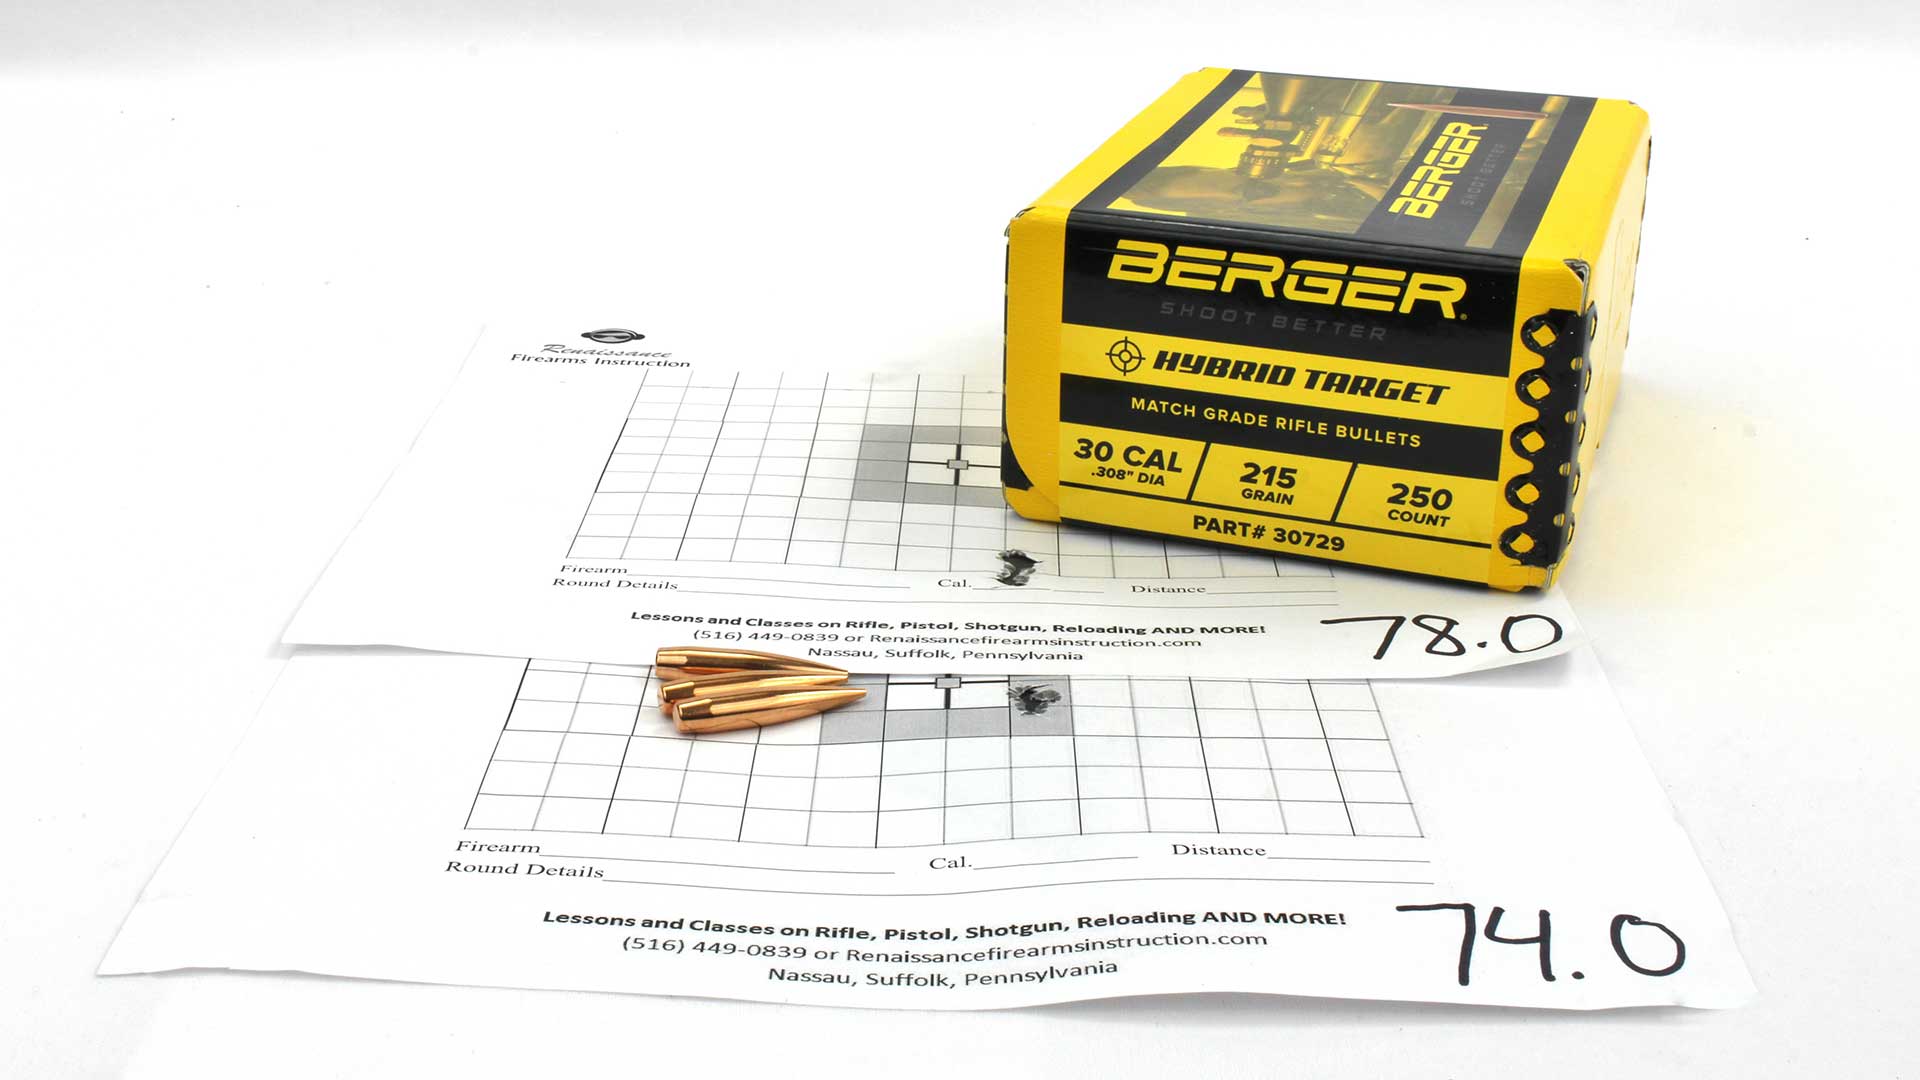 Berger Hybrid Target bullets laying on a shot target showing a tight, accurate group.